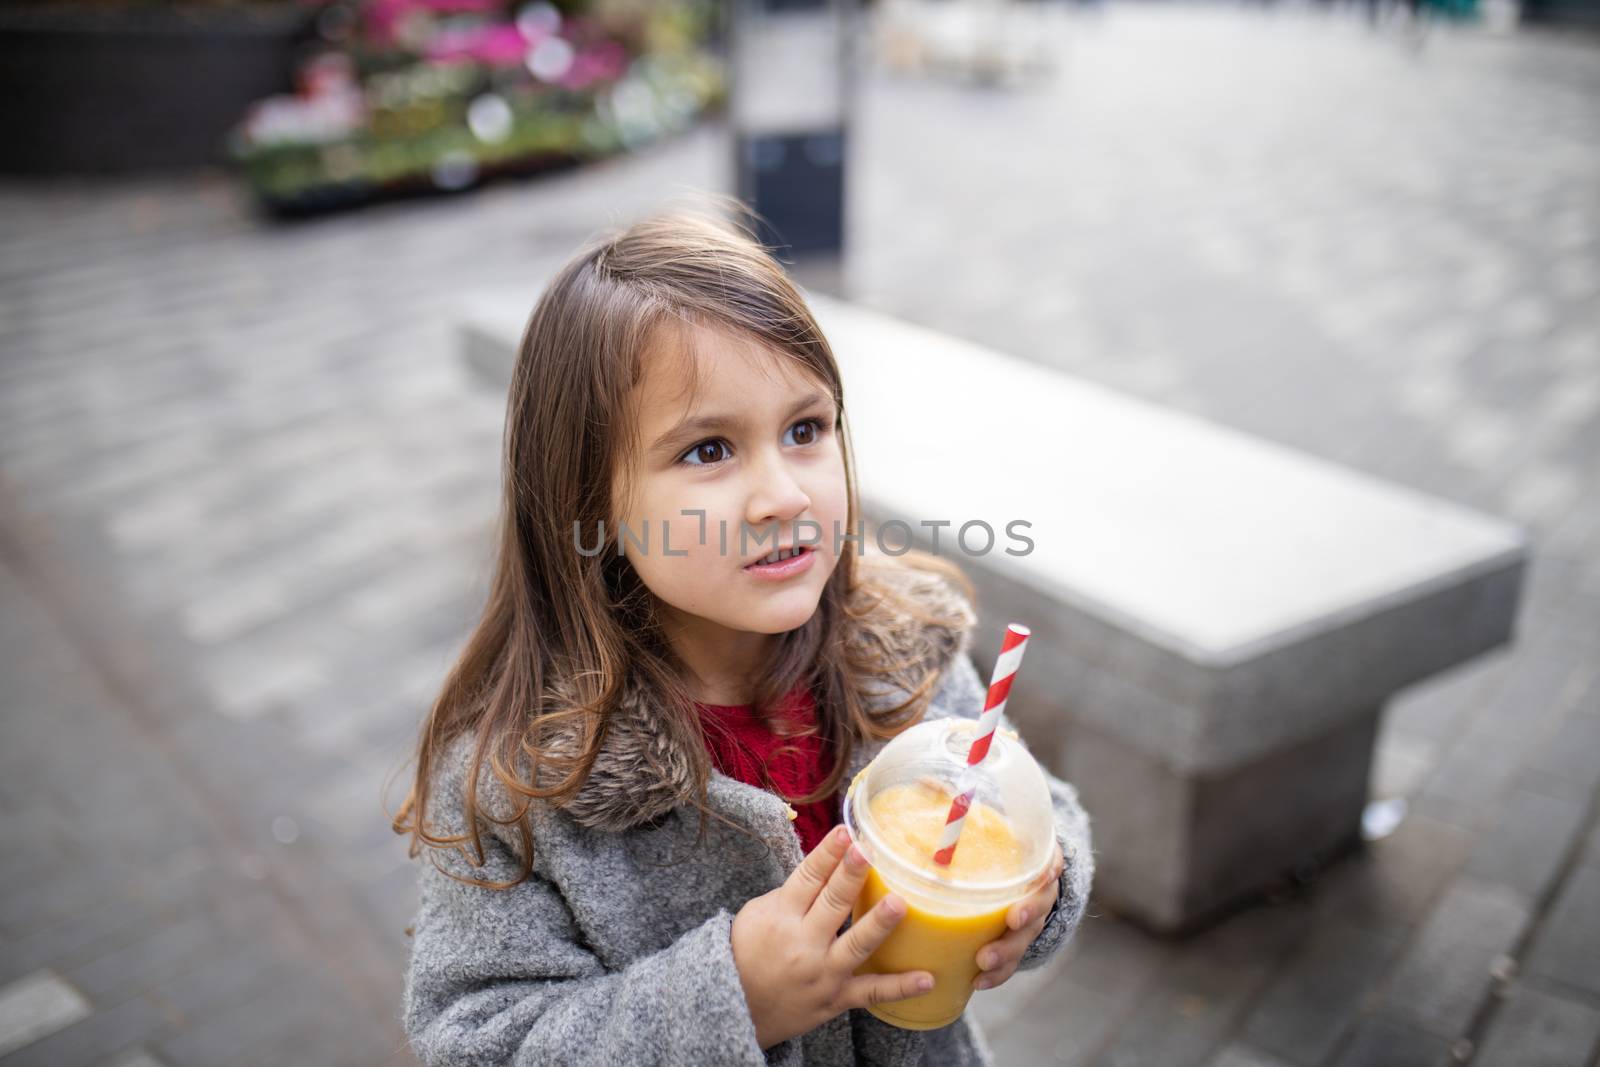 Adorable brunette little girl in the street holding yellow smoothie with striped straw. Cute young child holding a cold fruit beverage. Refreshing drinks for kids